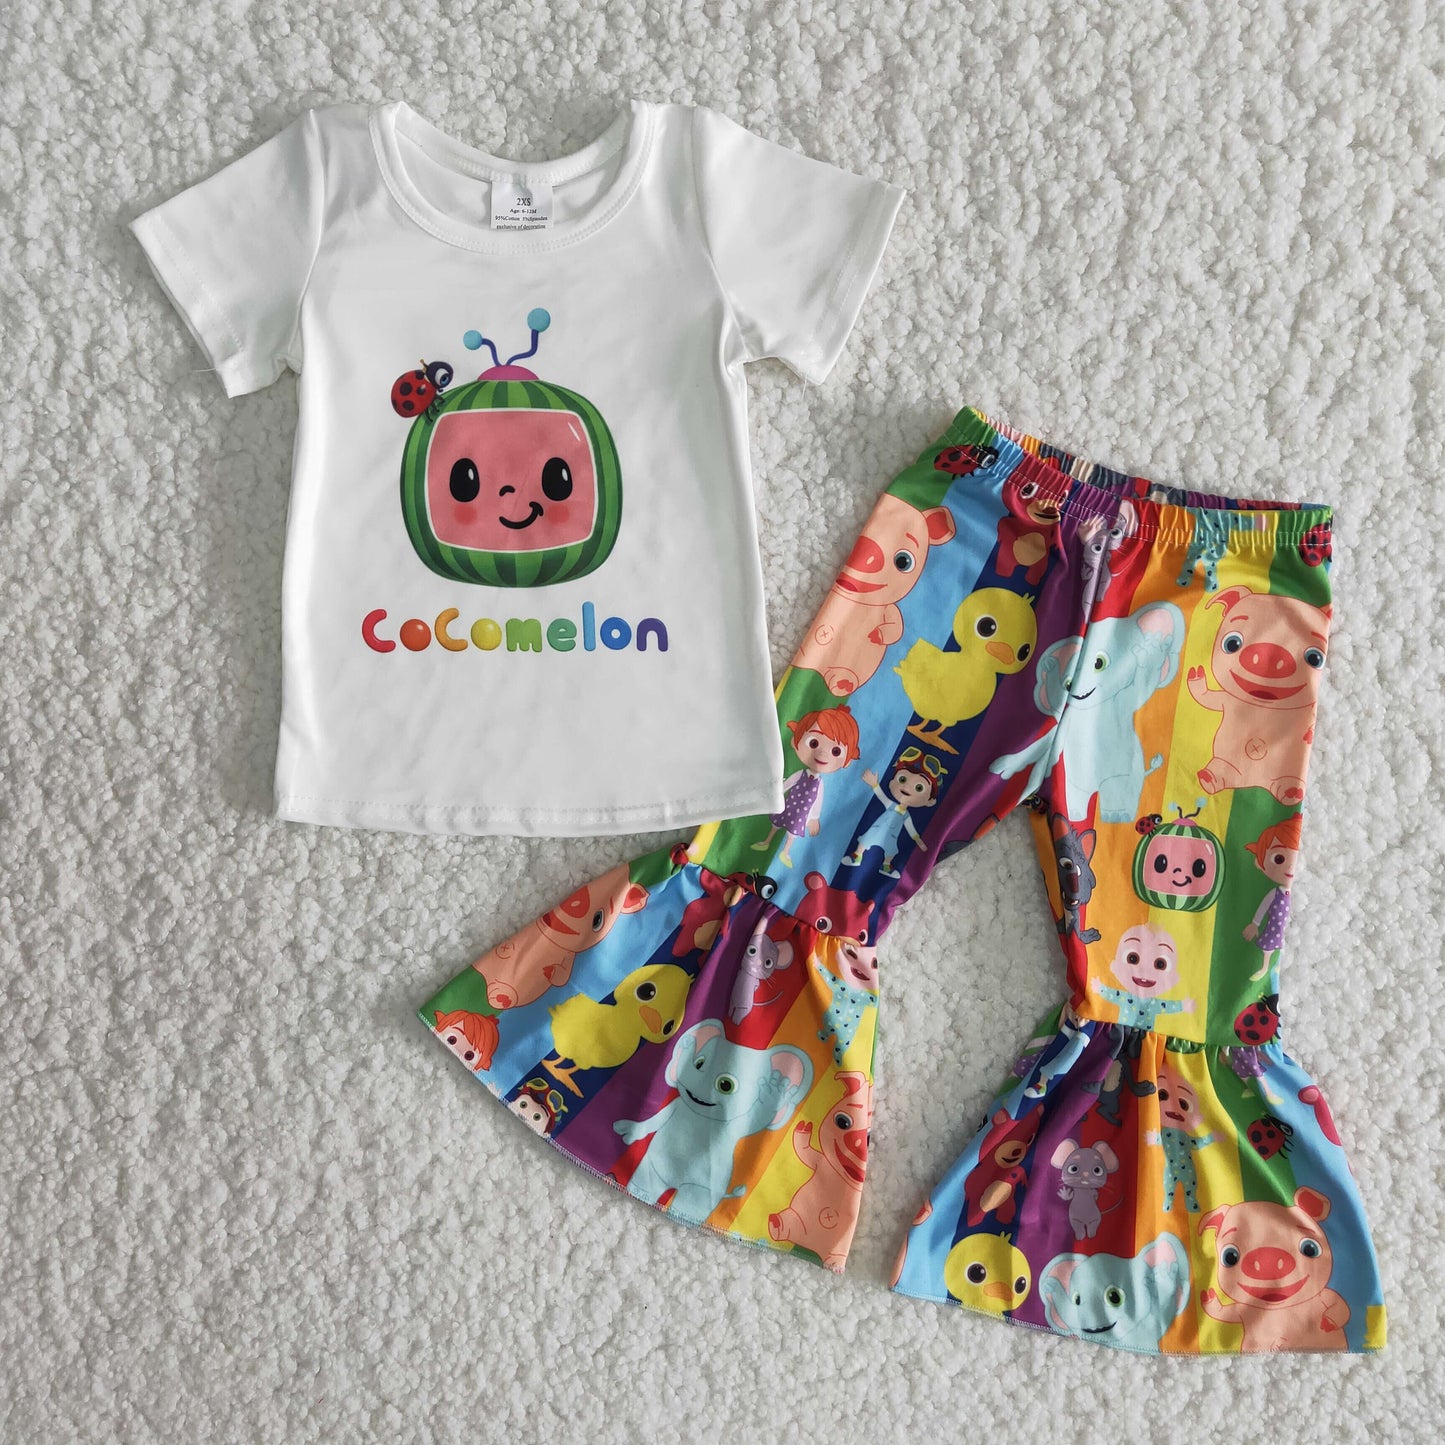 Cute Melon Short Sleeve Shirt Colorful Bell Pants Outfit